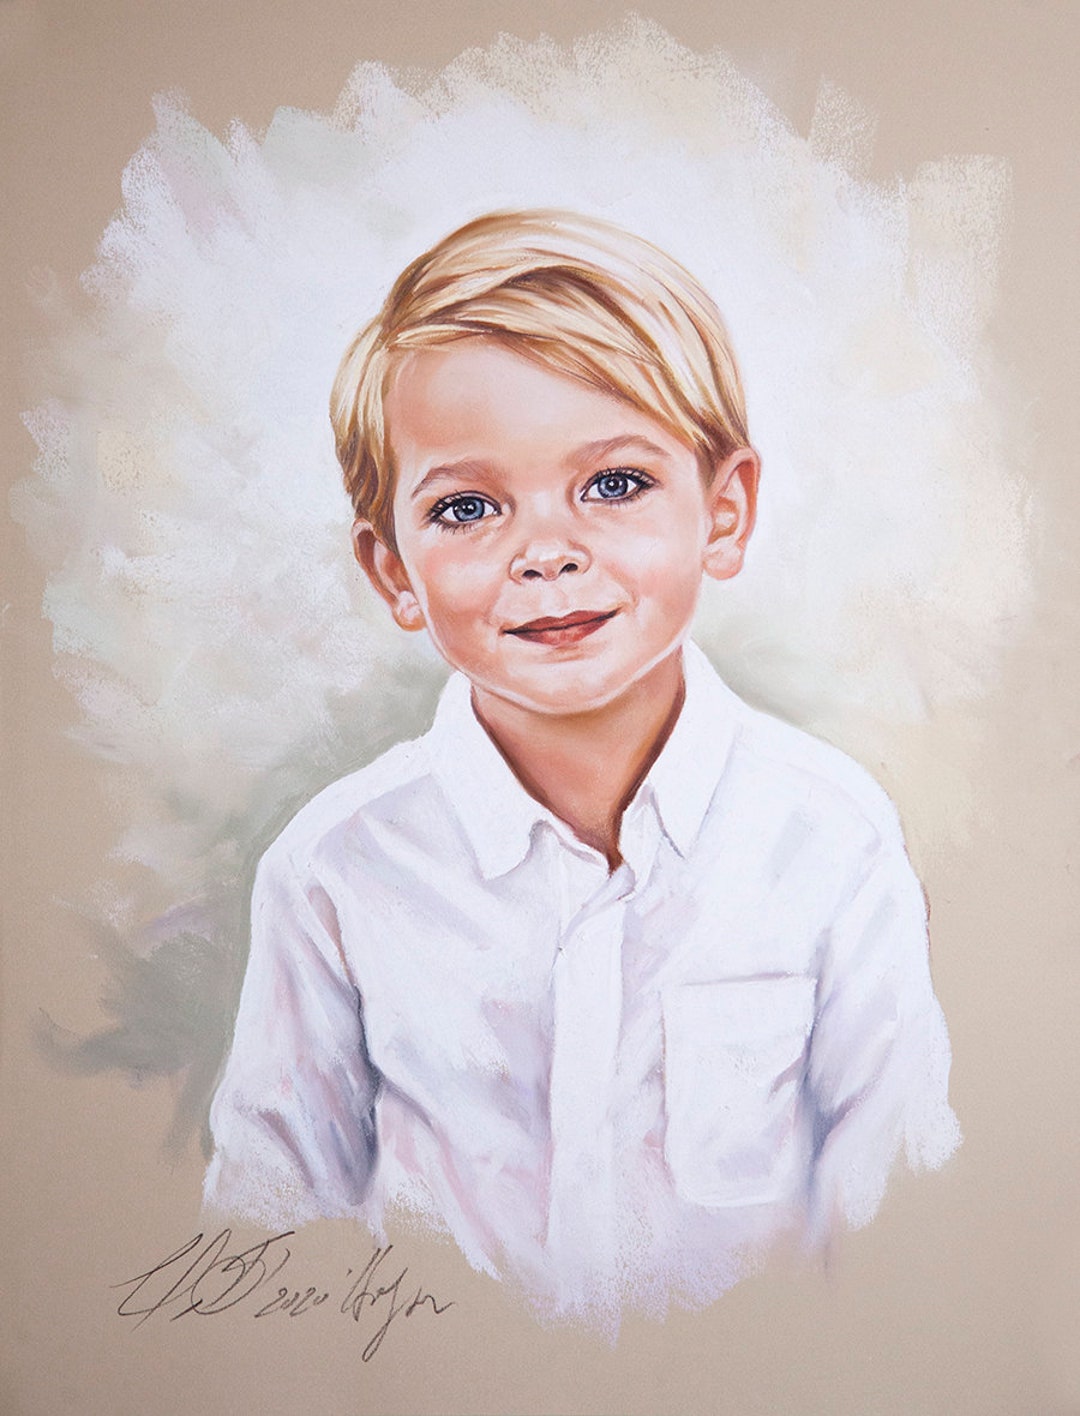 Custom Pastel Portrait From Photography. Painting Portrait of a Boy. - Etsy